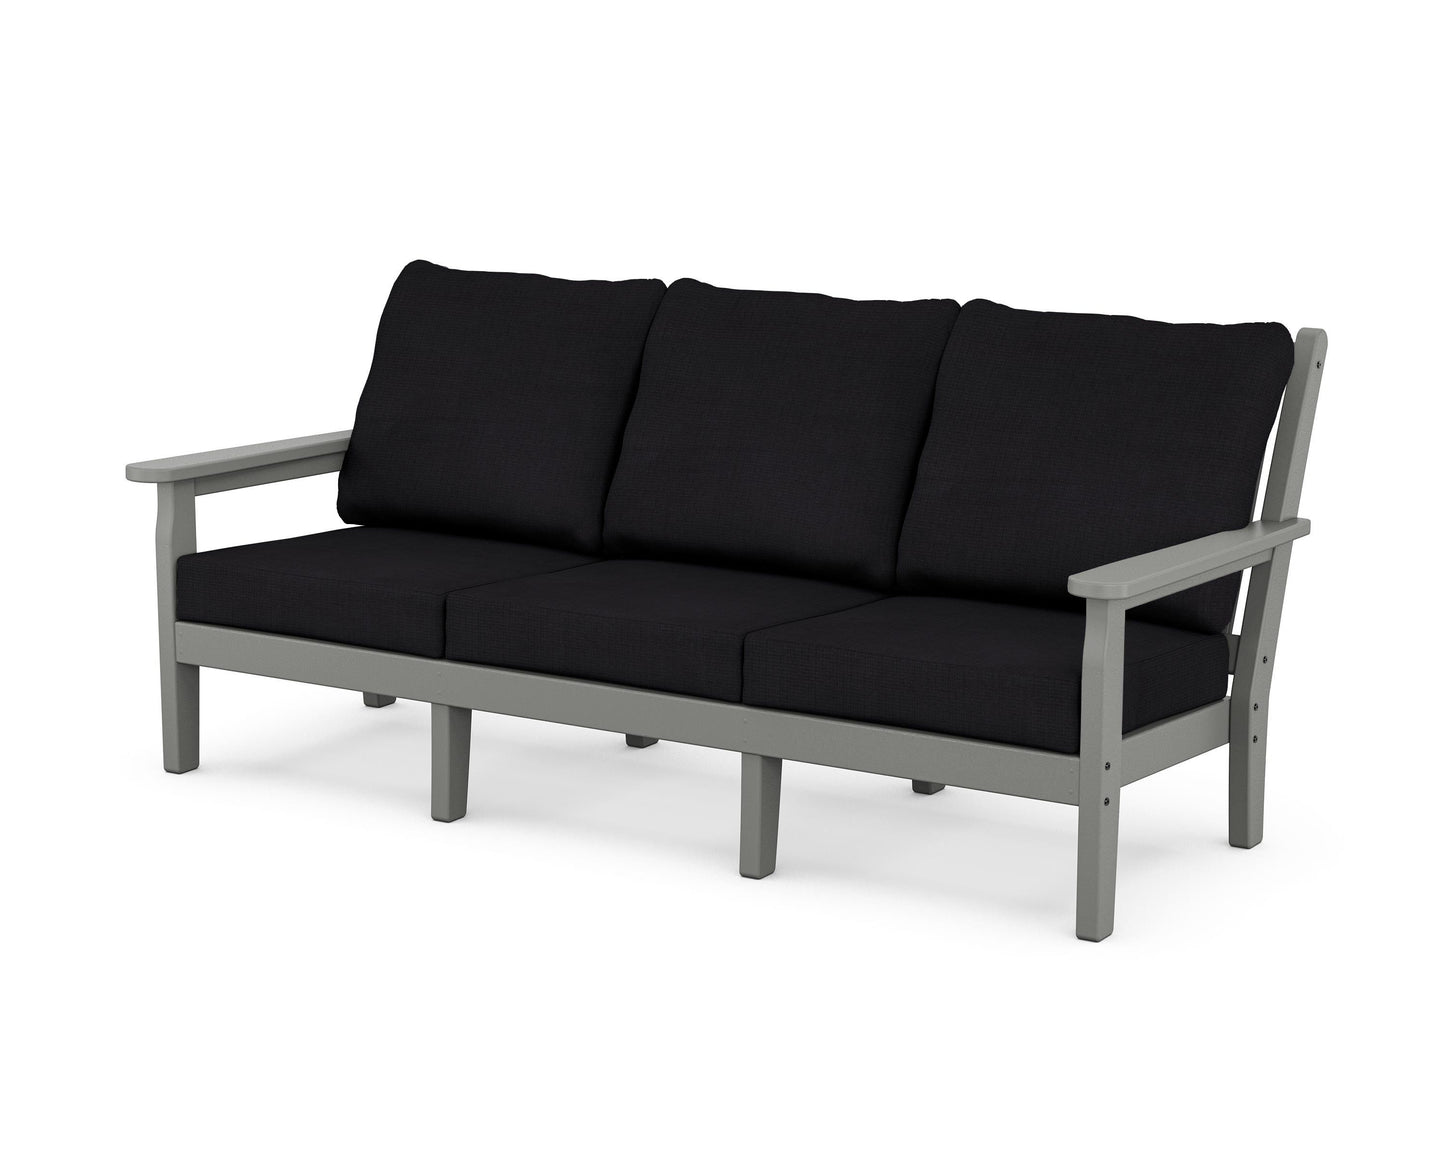 Chippendale Deep Seating Sofa